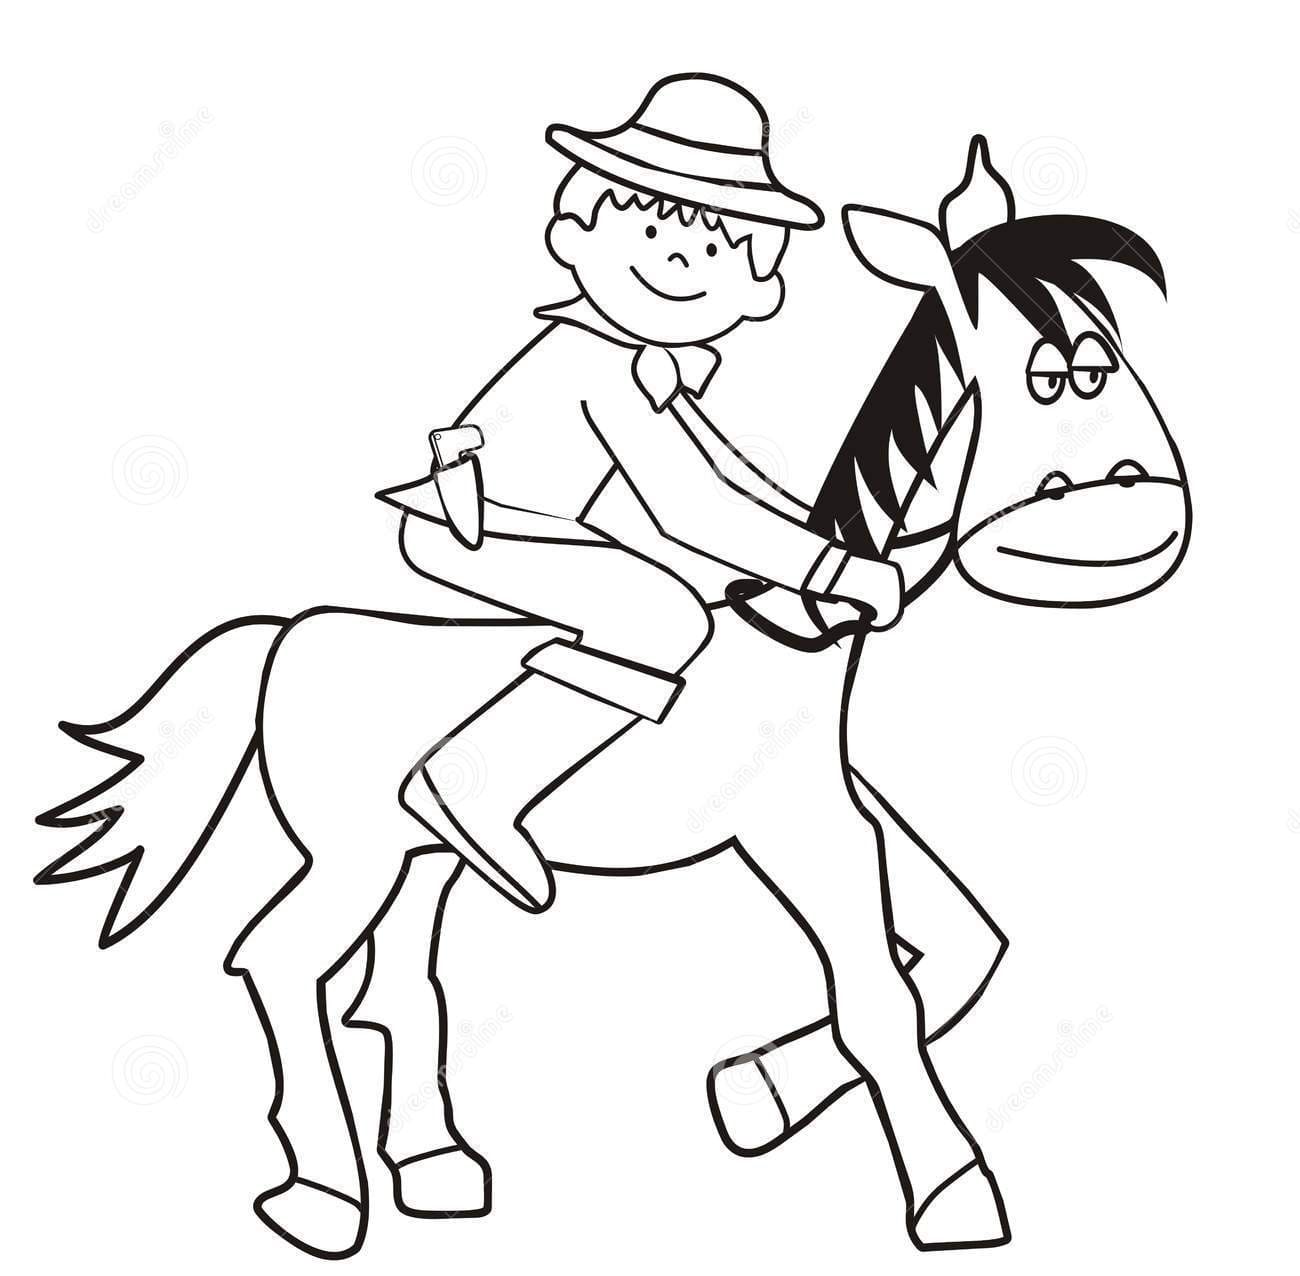 Horse And Cowboy Coloring Page